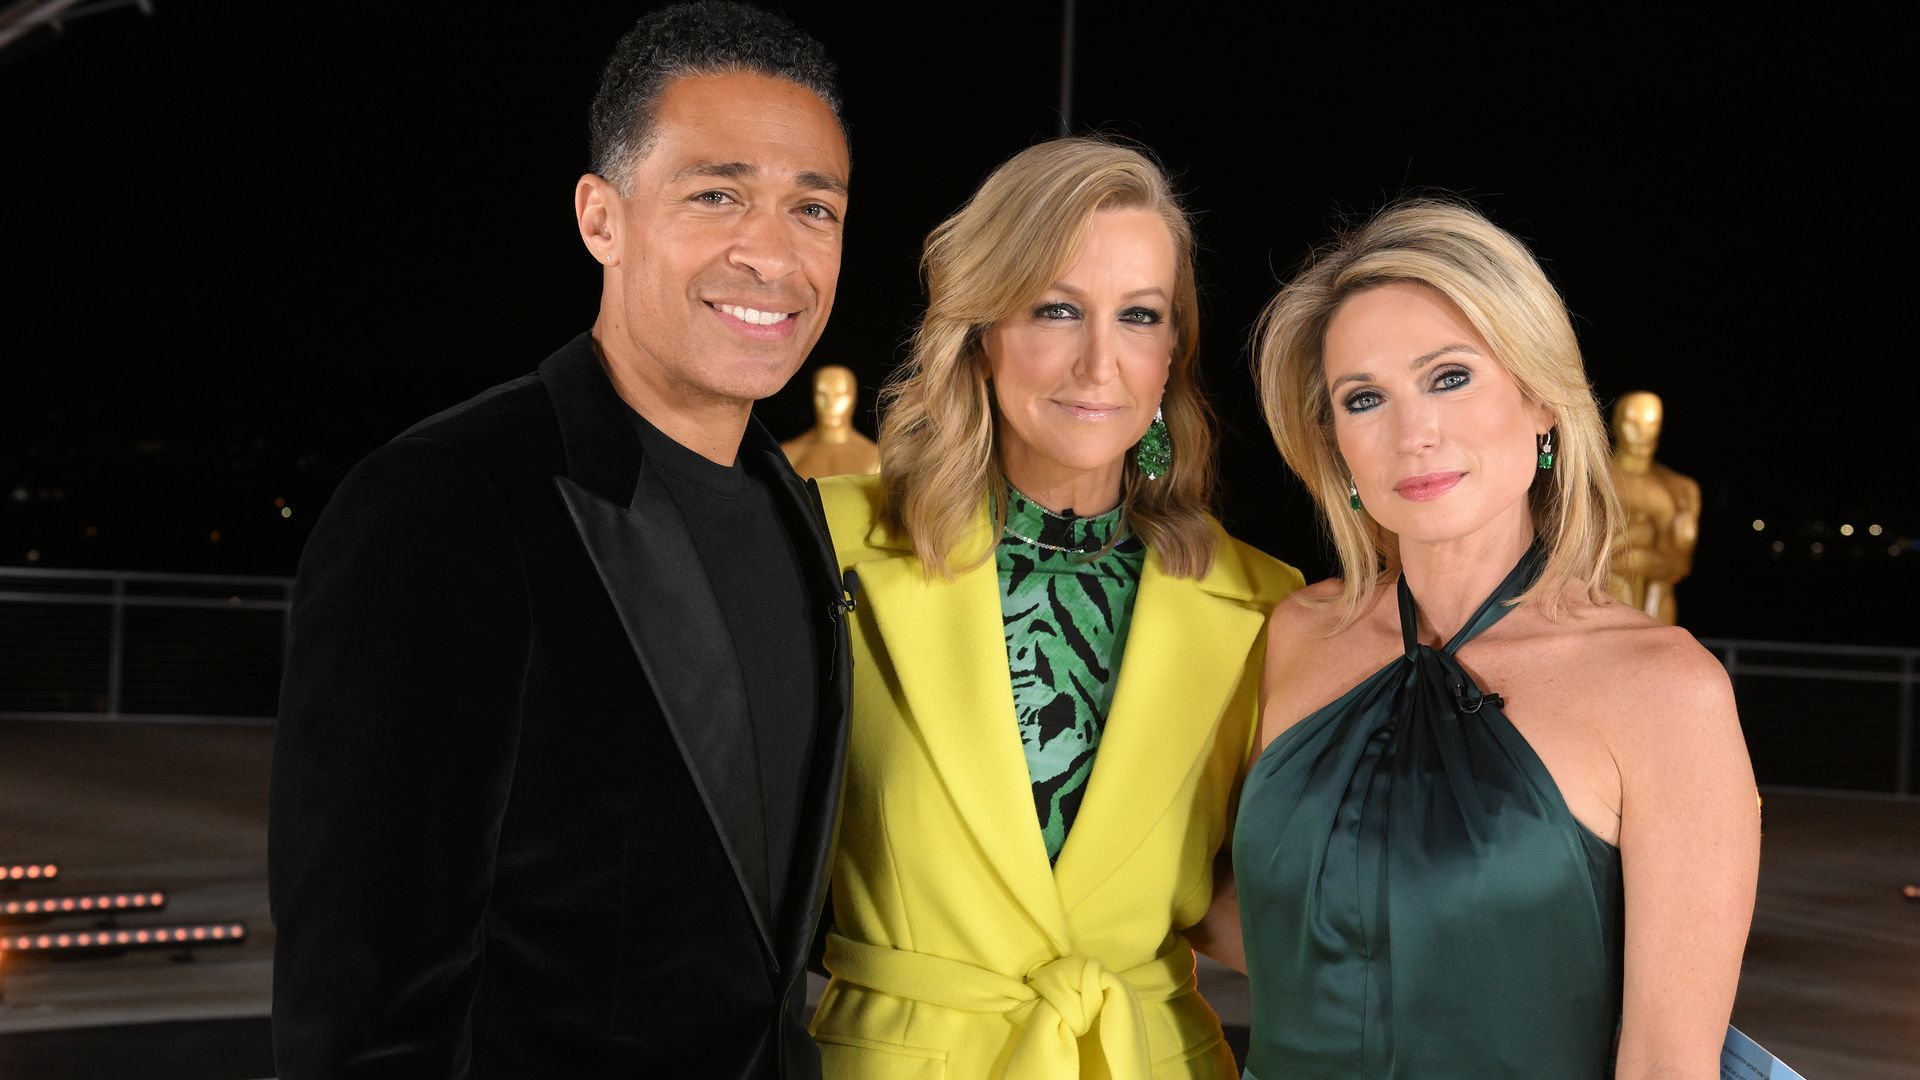 Amy Robach and T.J. Holmes with Lara Spencer